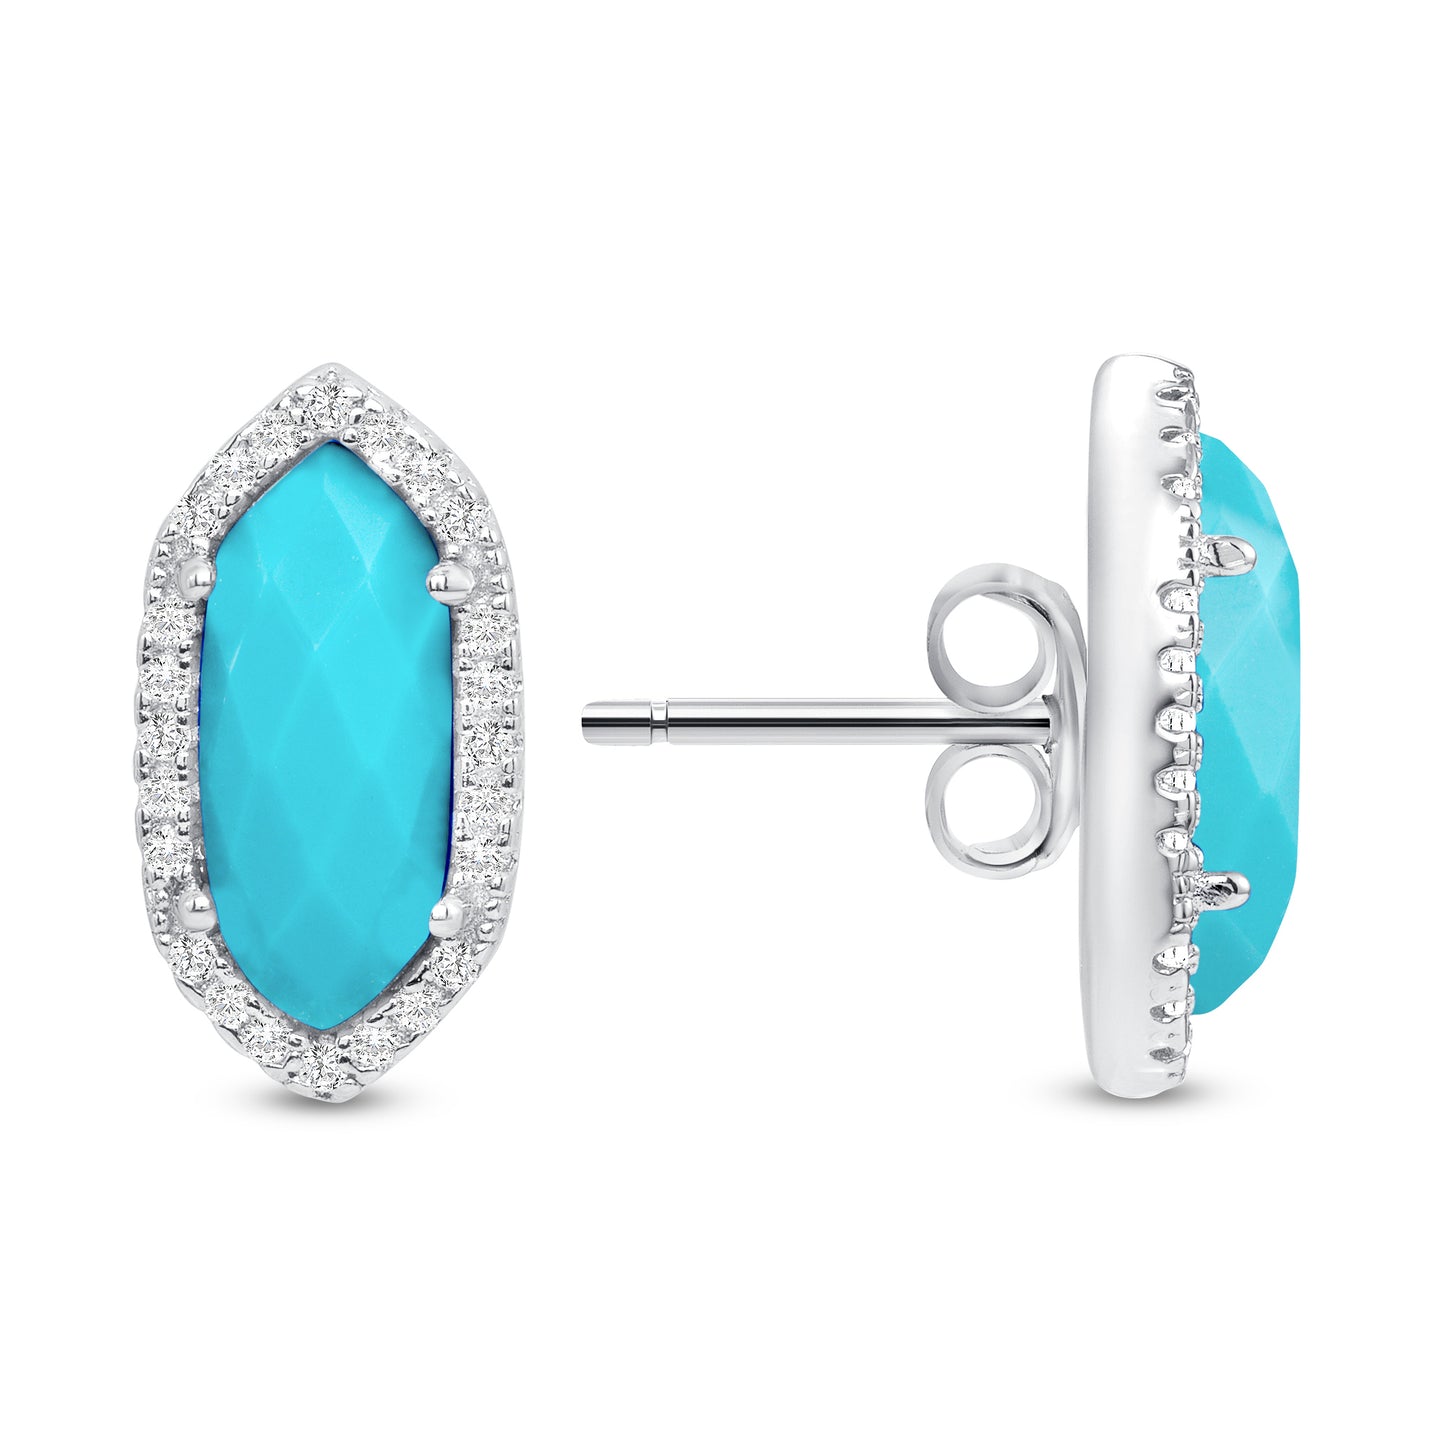 Silver 925 Rhodium Plated Navette Shaped Turquoise Cubic Zirconia Stud Earring. DGE2002TQ